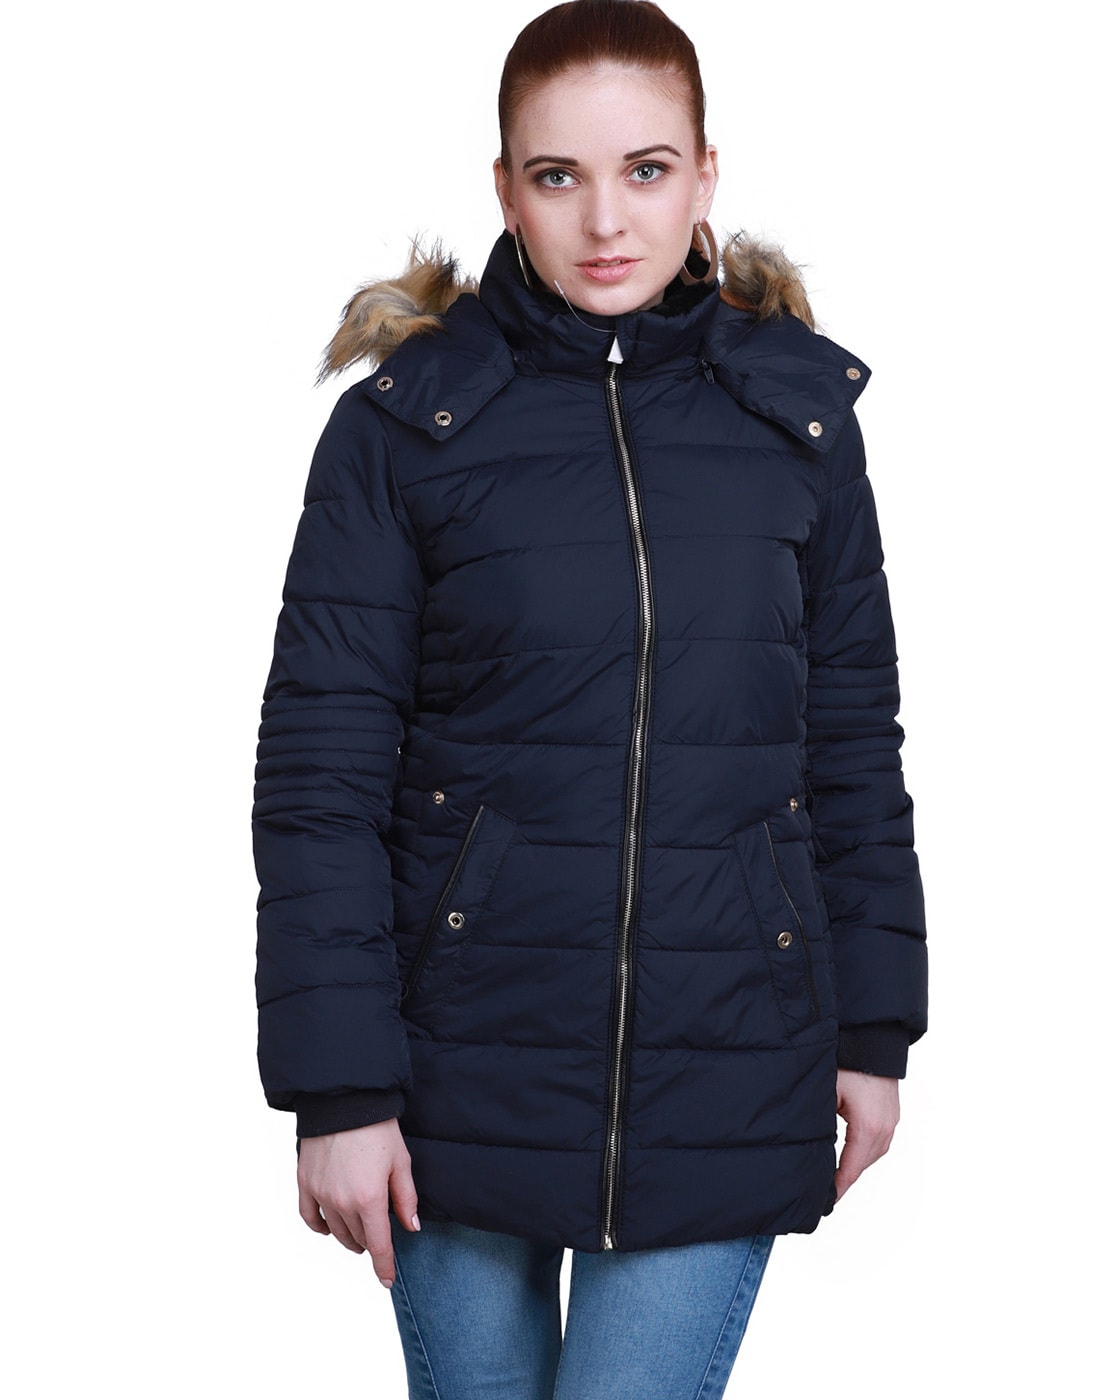 Buy Navy Jackets & Coats for Women by MADAME Online | Ajio.com